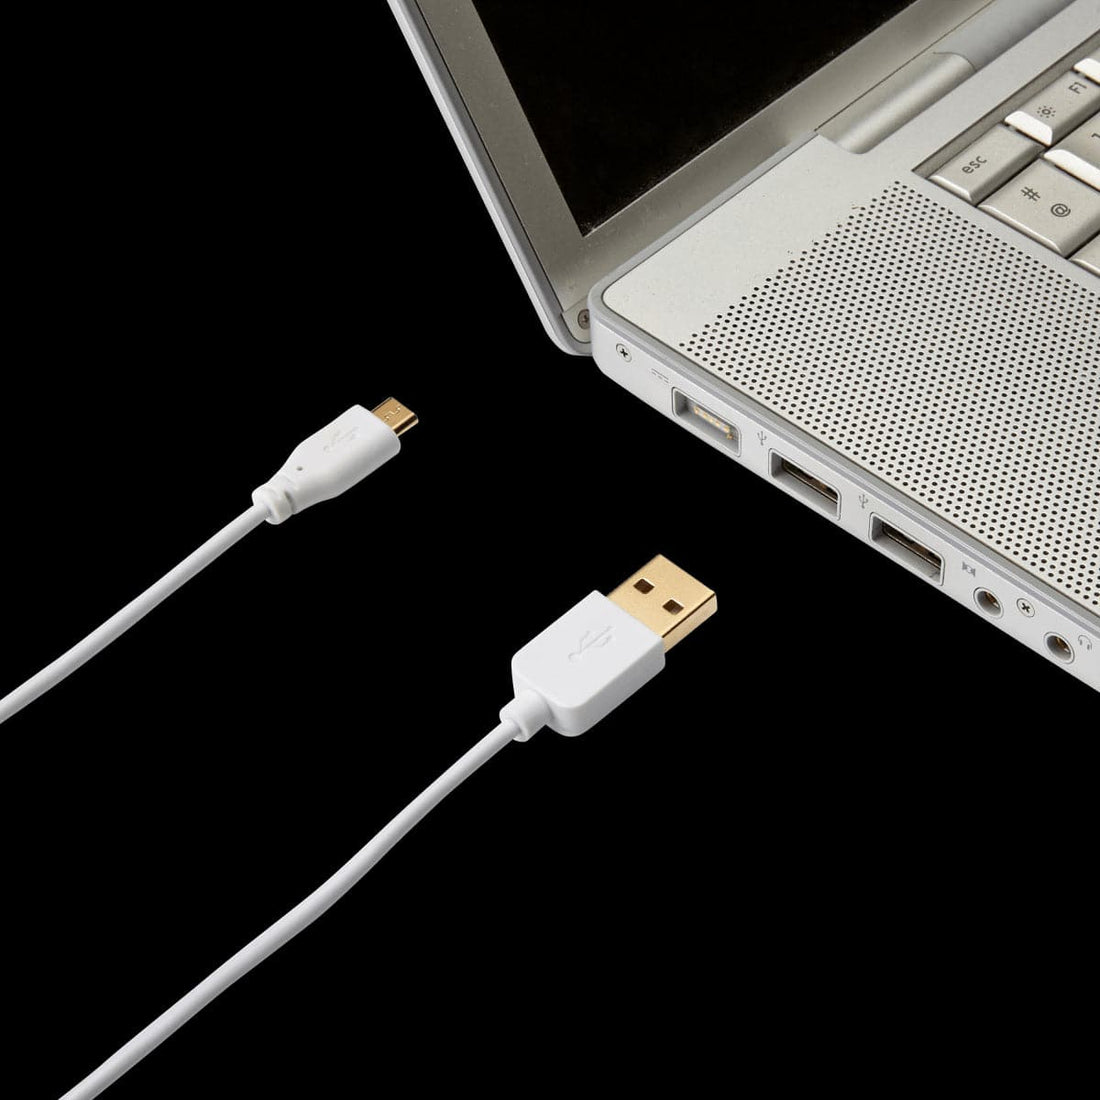 2 M USB 2.0 TYPE A/MICRO USB CABLE - best price from Maltashopper.com BR420005277